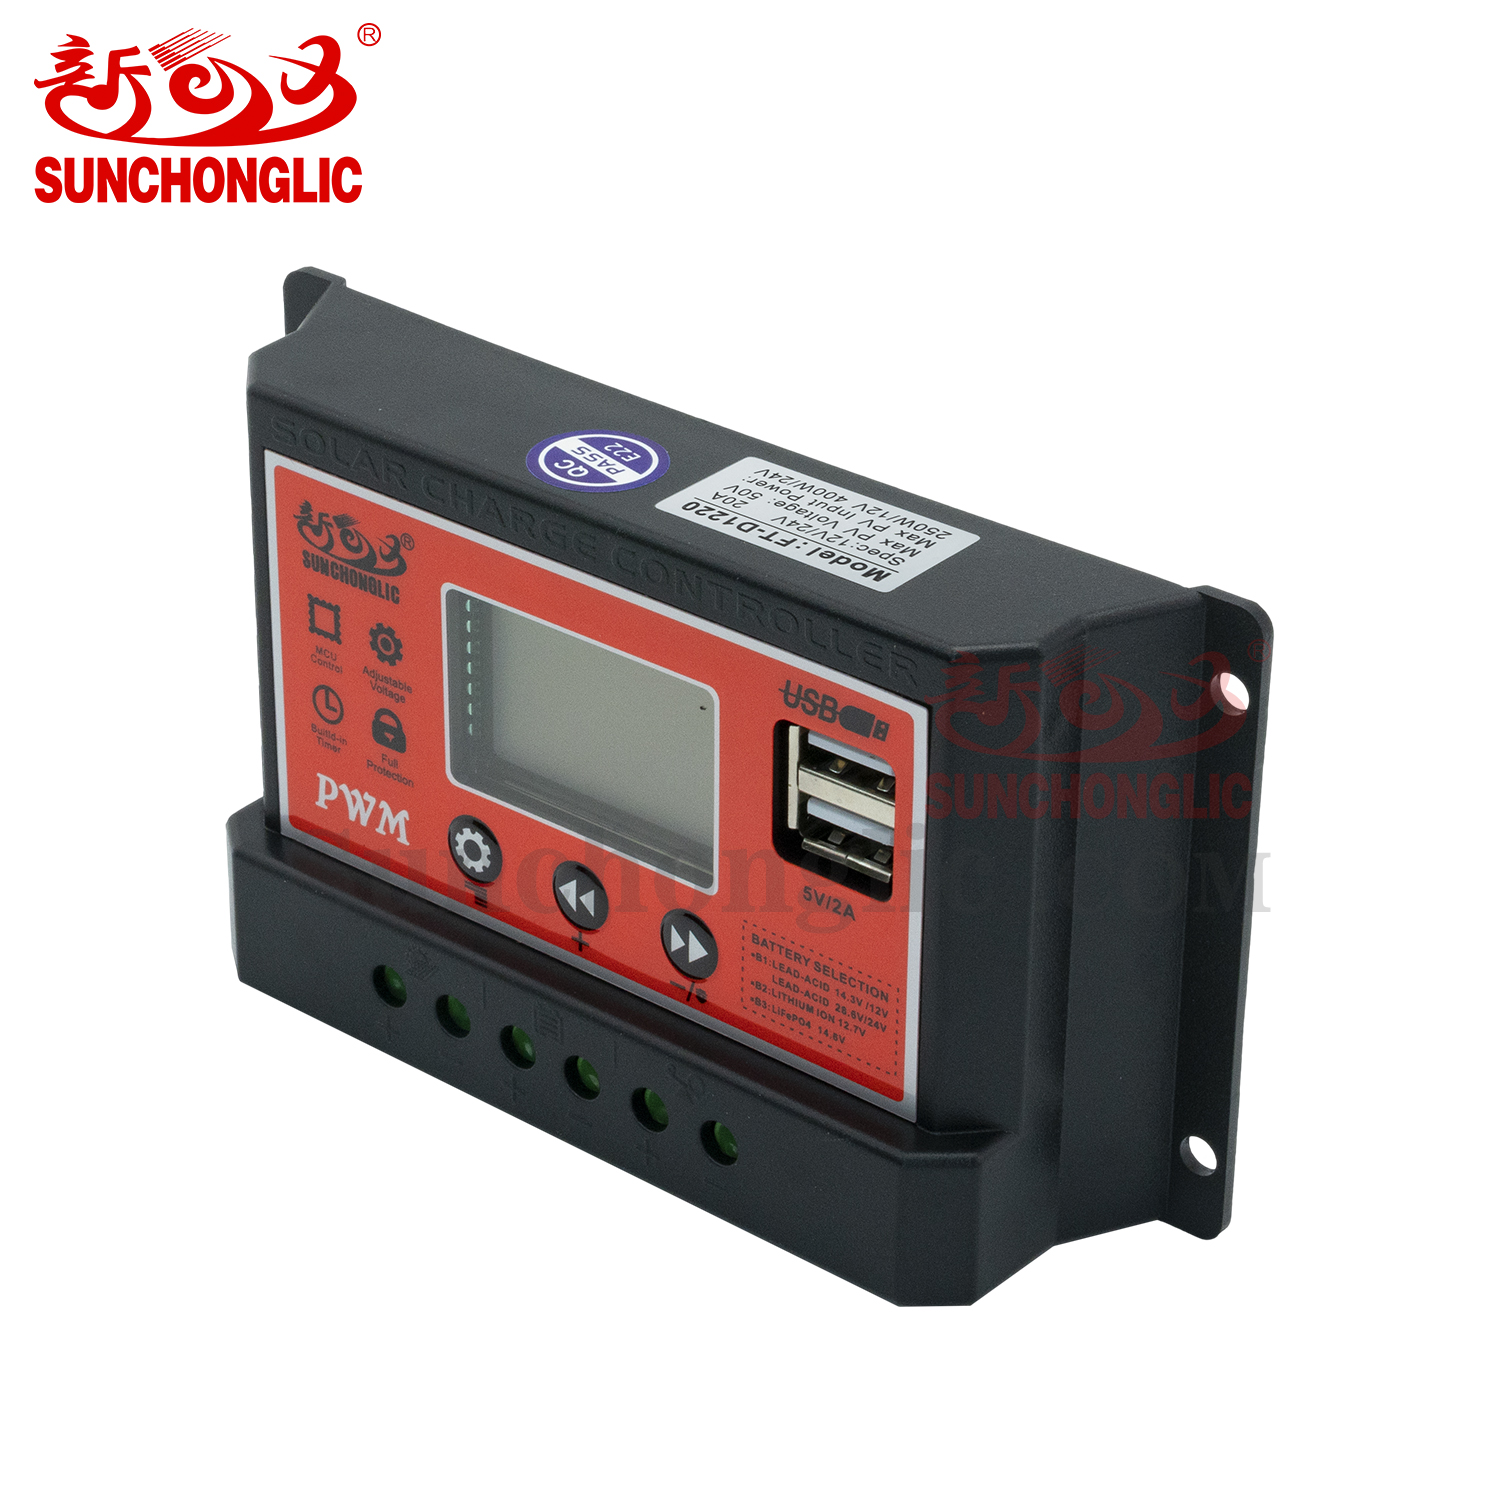 PWM Solar Charge Controller - FT-D1220